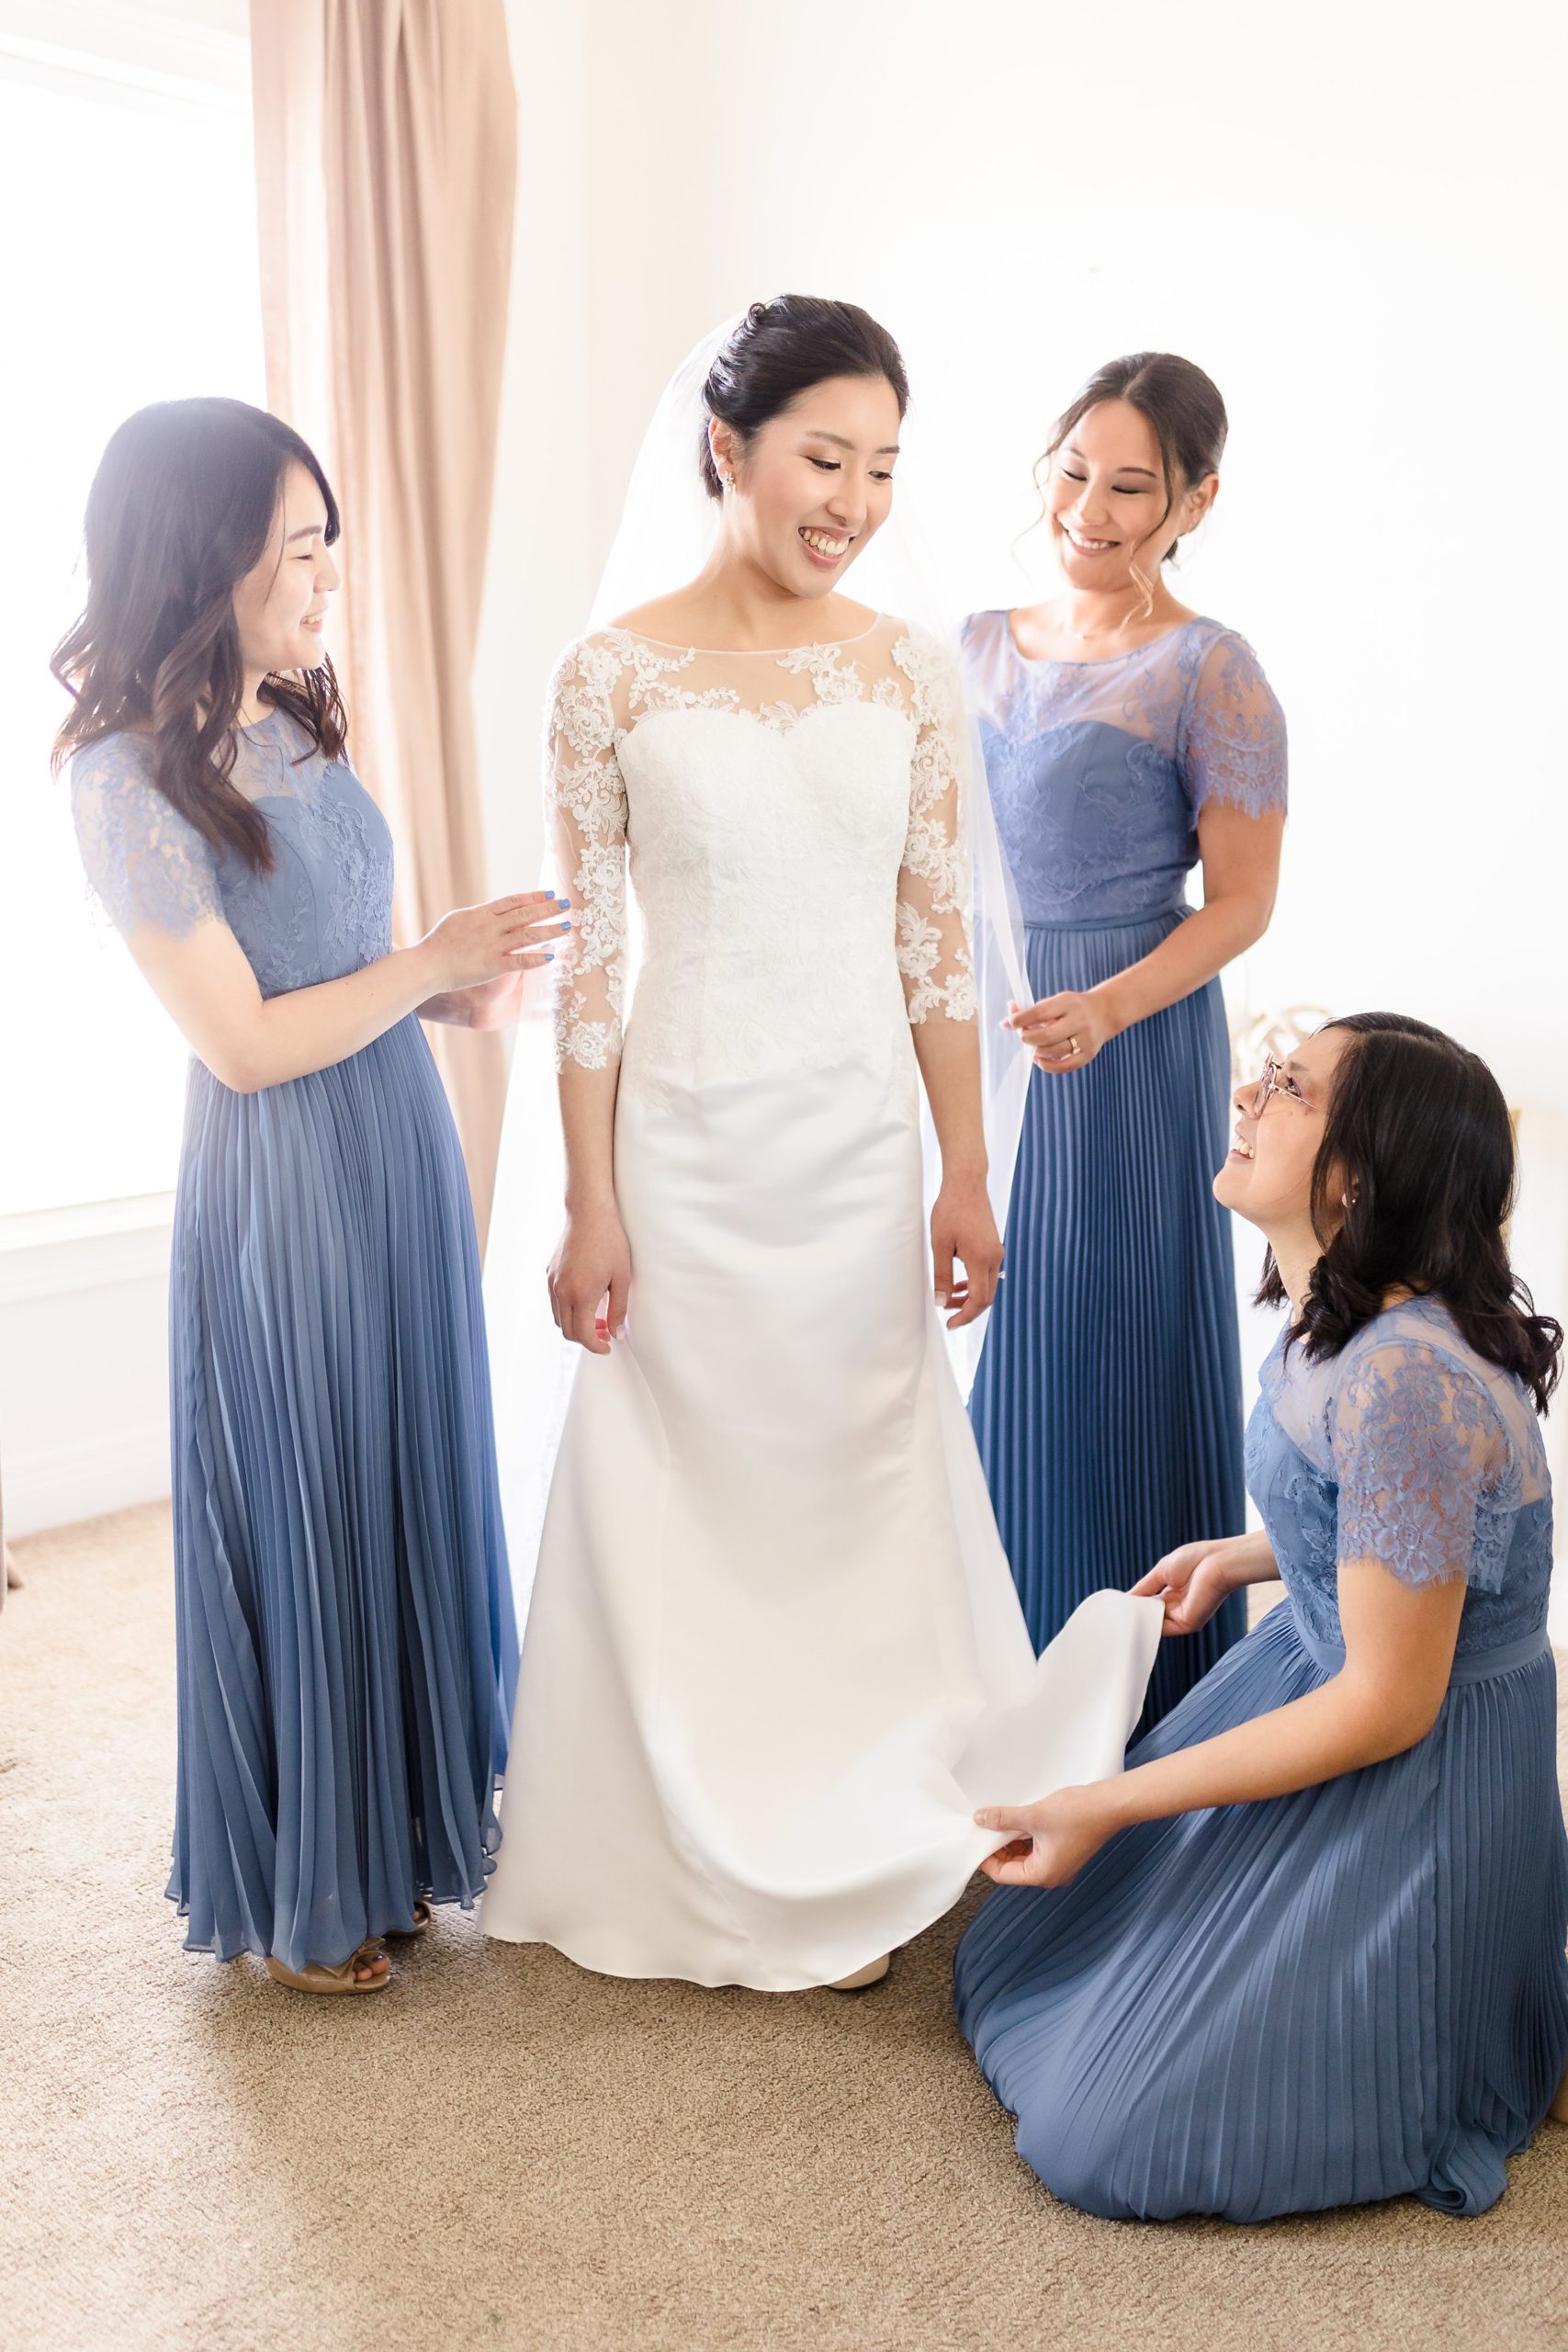 Bridesmaids help the bride get ready for her wedding at the Ritz Charles in Carmel, Indiana.